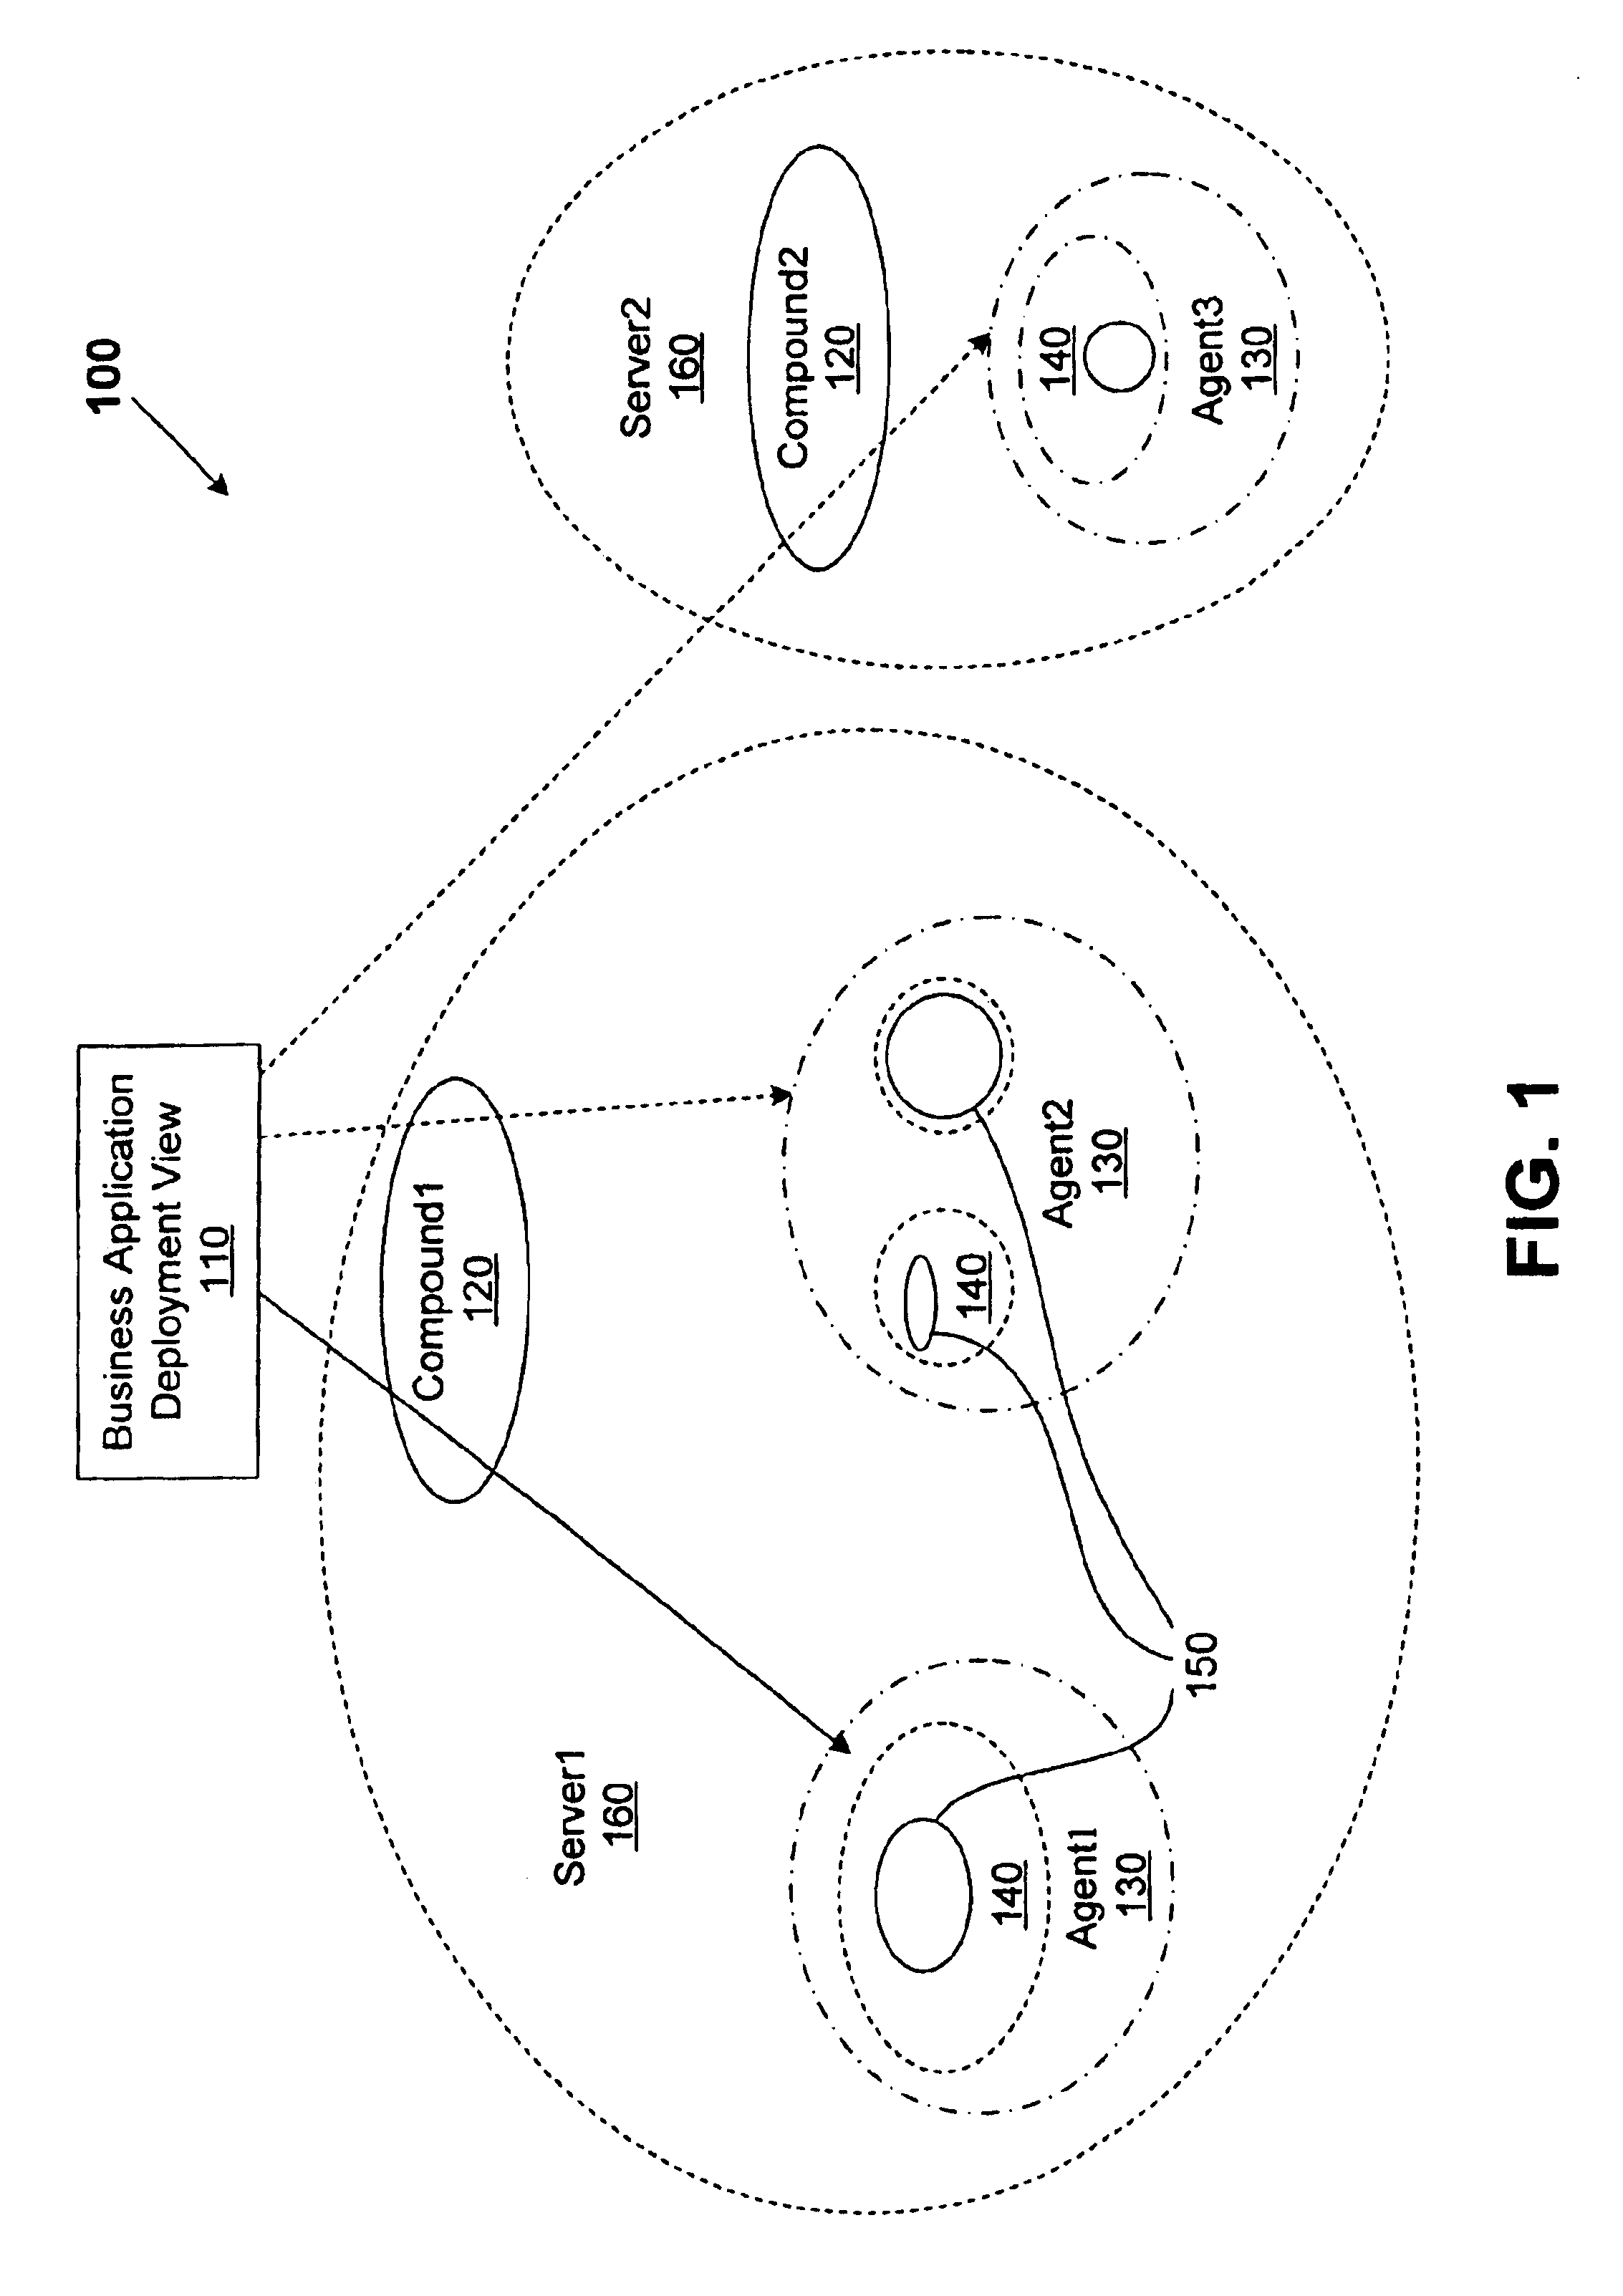 Method of administering software components using asynchronous messaging in a multi-platform, multi-programming language environment